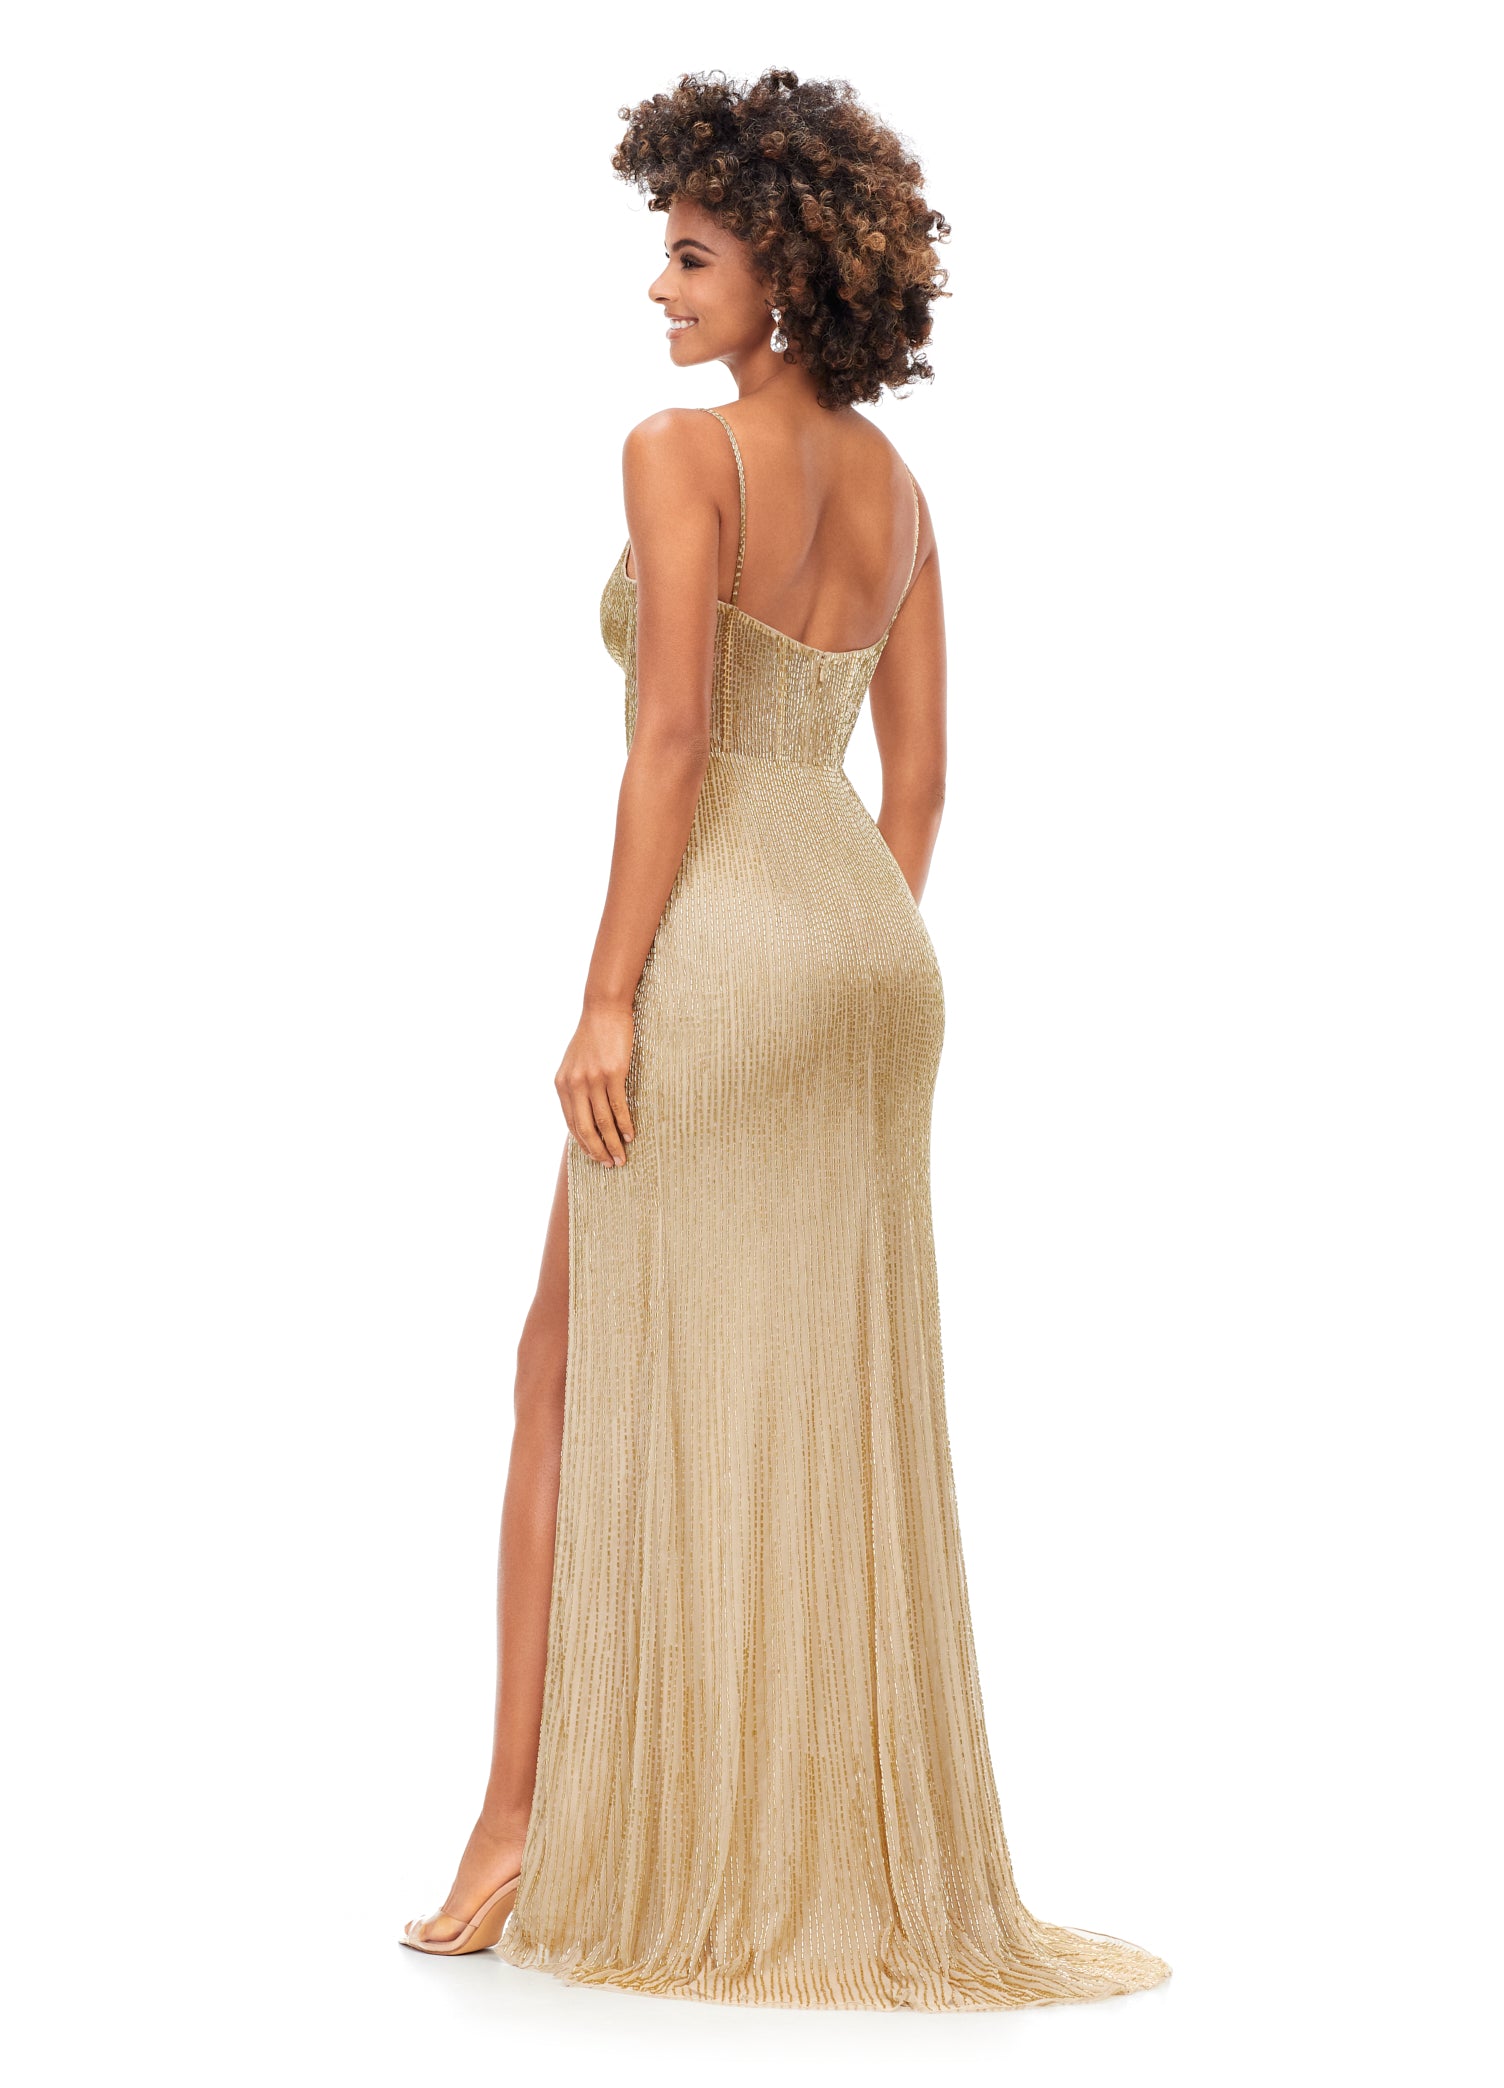 Ashley Lauren 11369 This Gold liquid beaded style features an exposed bustier that is sure to accentuate your curves. The look is complete with sweep train and left leg slit.